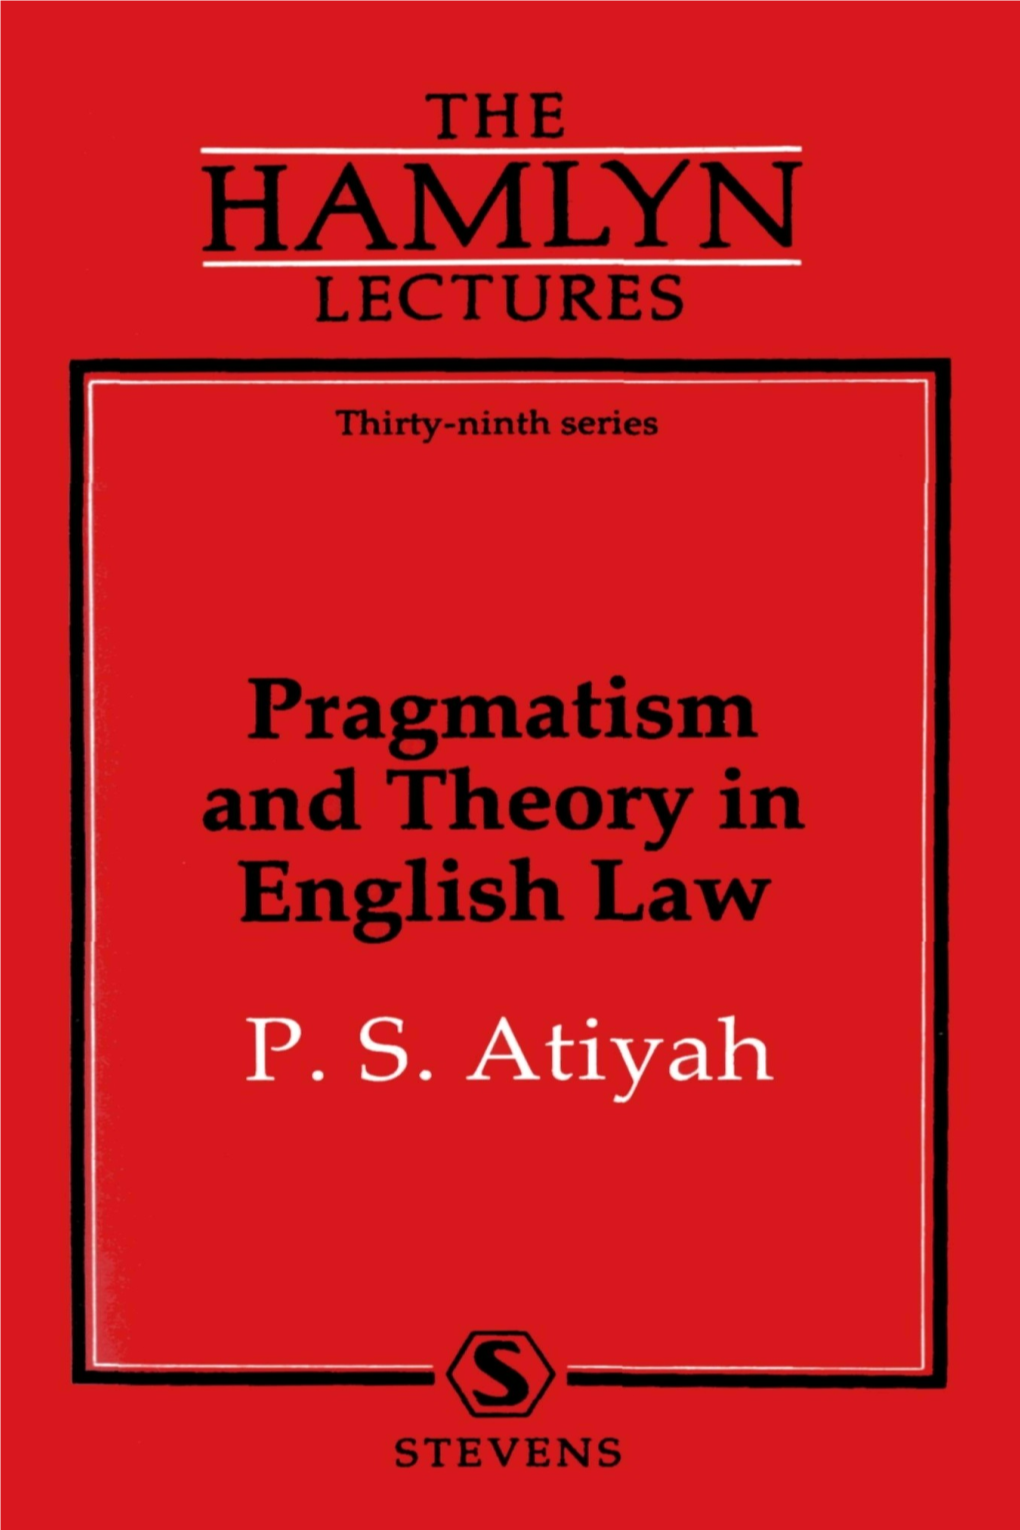 Pragmatism and Theory in English Law